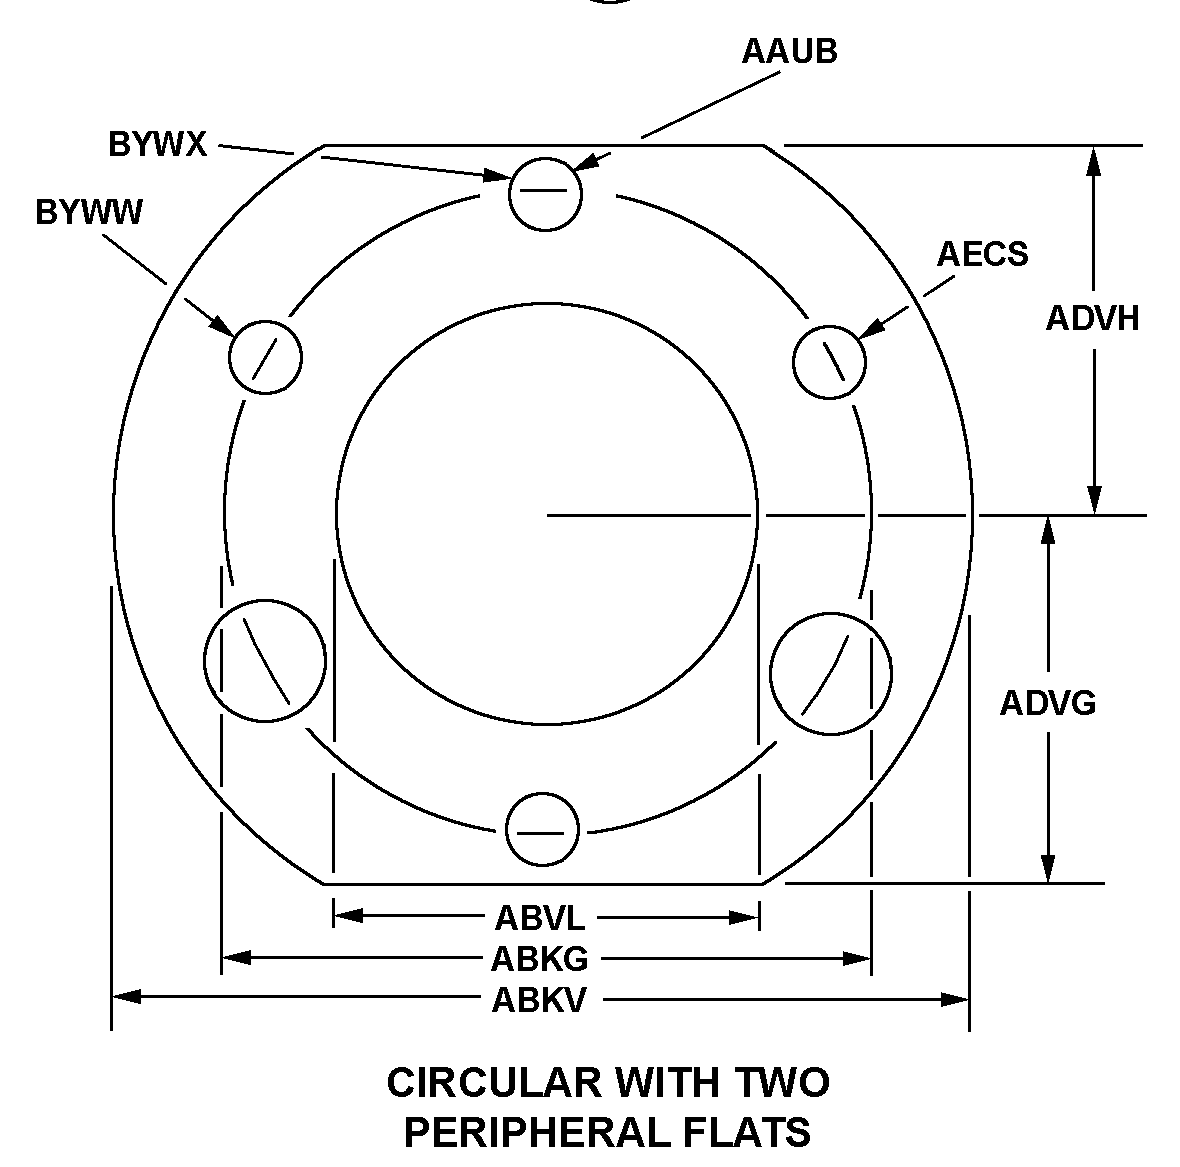 CIRCULAR WITH TWO PERIPHERAL FLATS style nsn 5330-00-599-6052